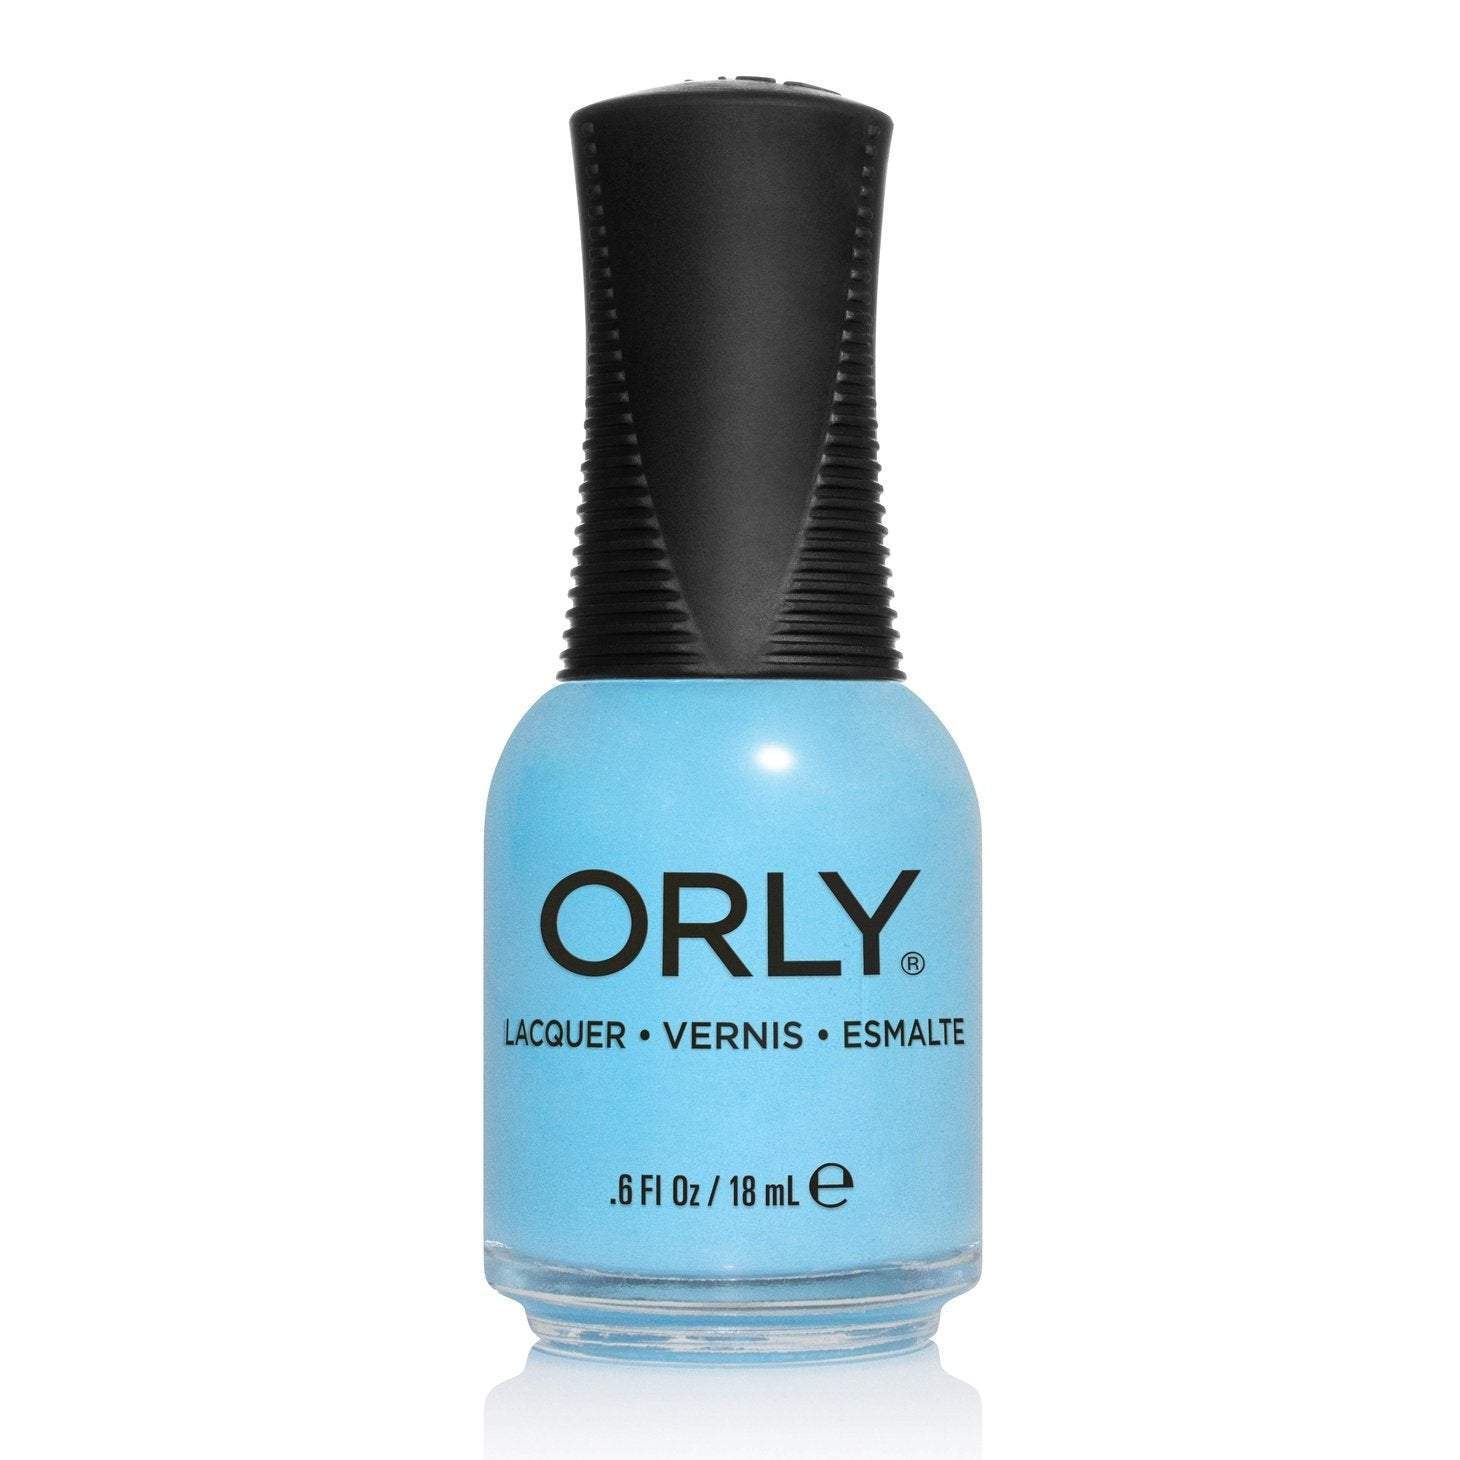 Orly Nail Lacquer Glass Half Full .6fl oz-Orly-Brand_Orly,Collection_Nails,Nail_Polish,ORLY_Summer Laquers,Pride